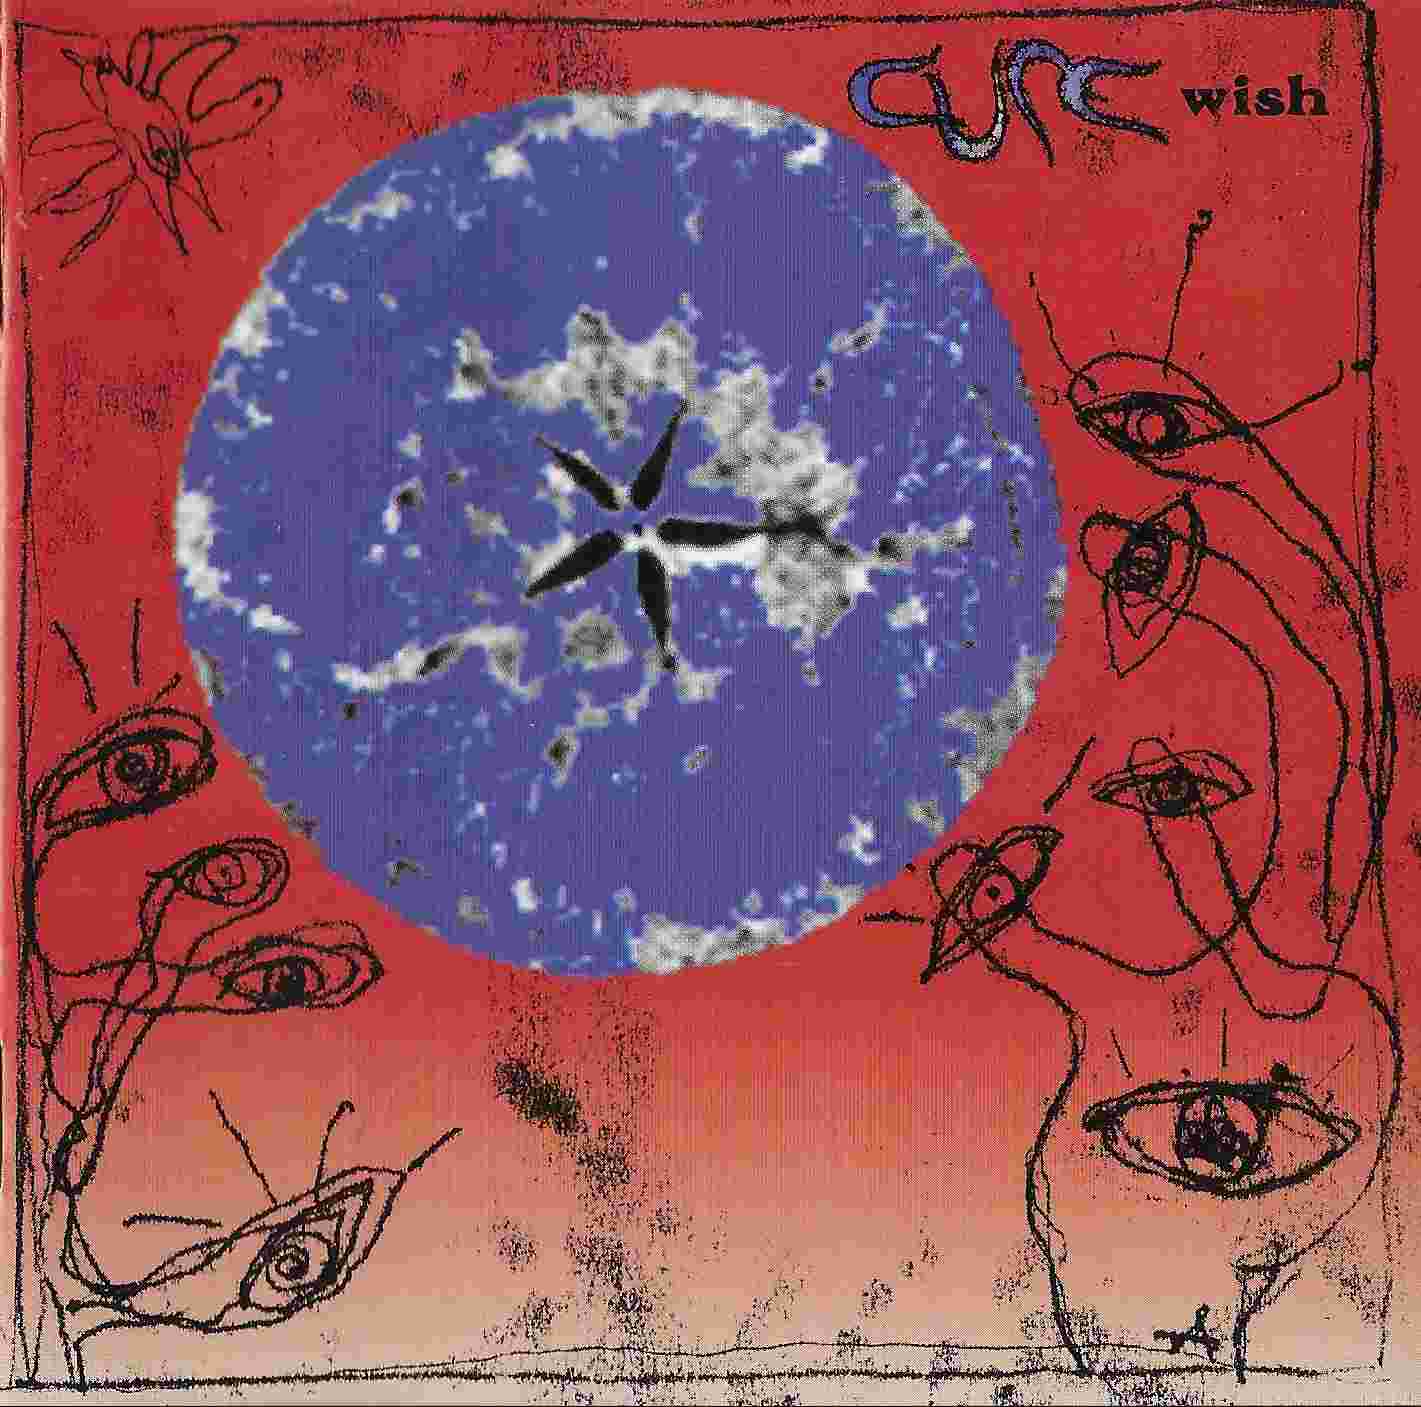 Picture of Wish by artist The Cure 